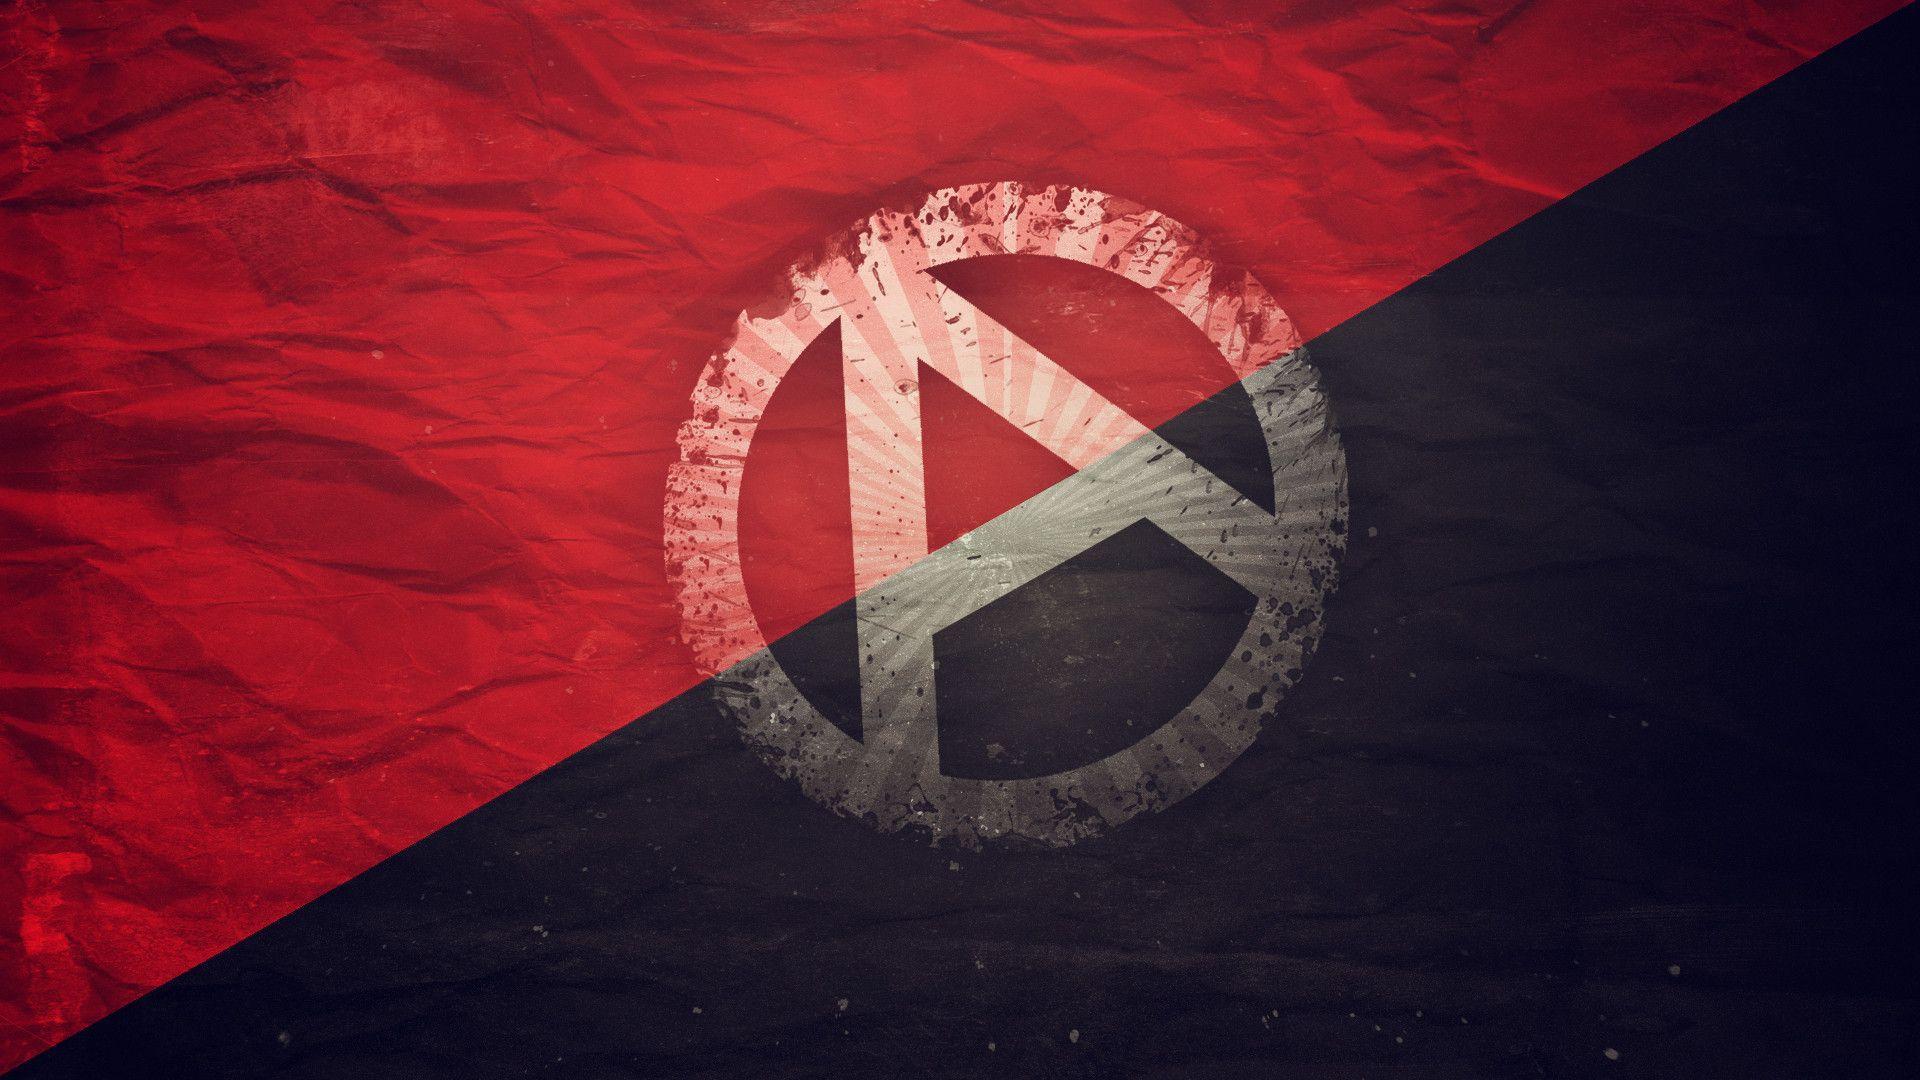 Anarchy Symbol Wallpapers - Wallpaper Cave